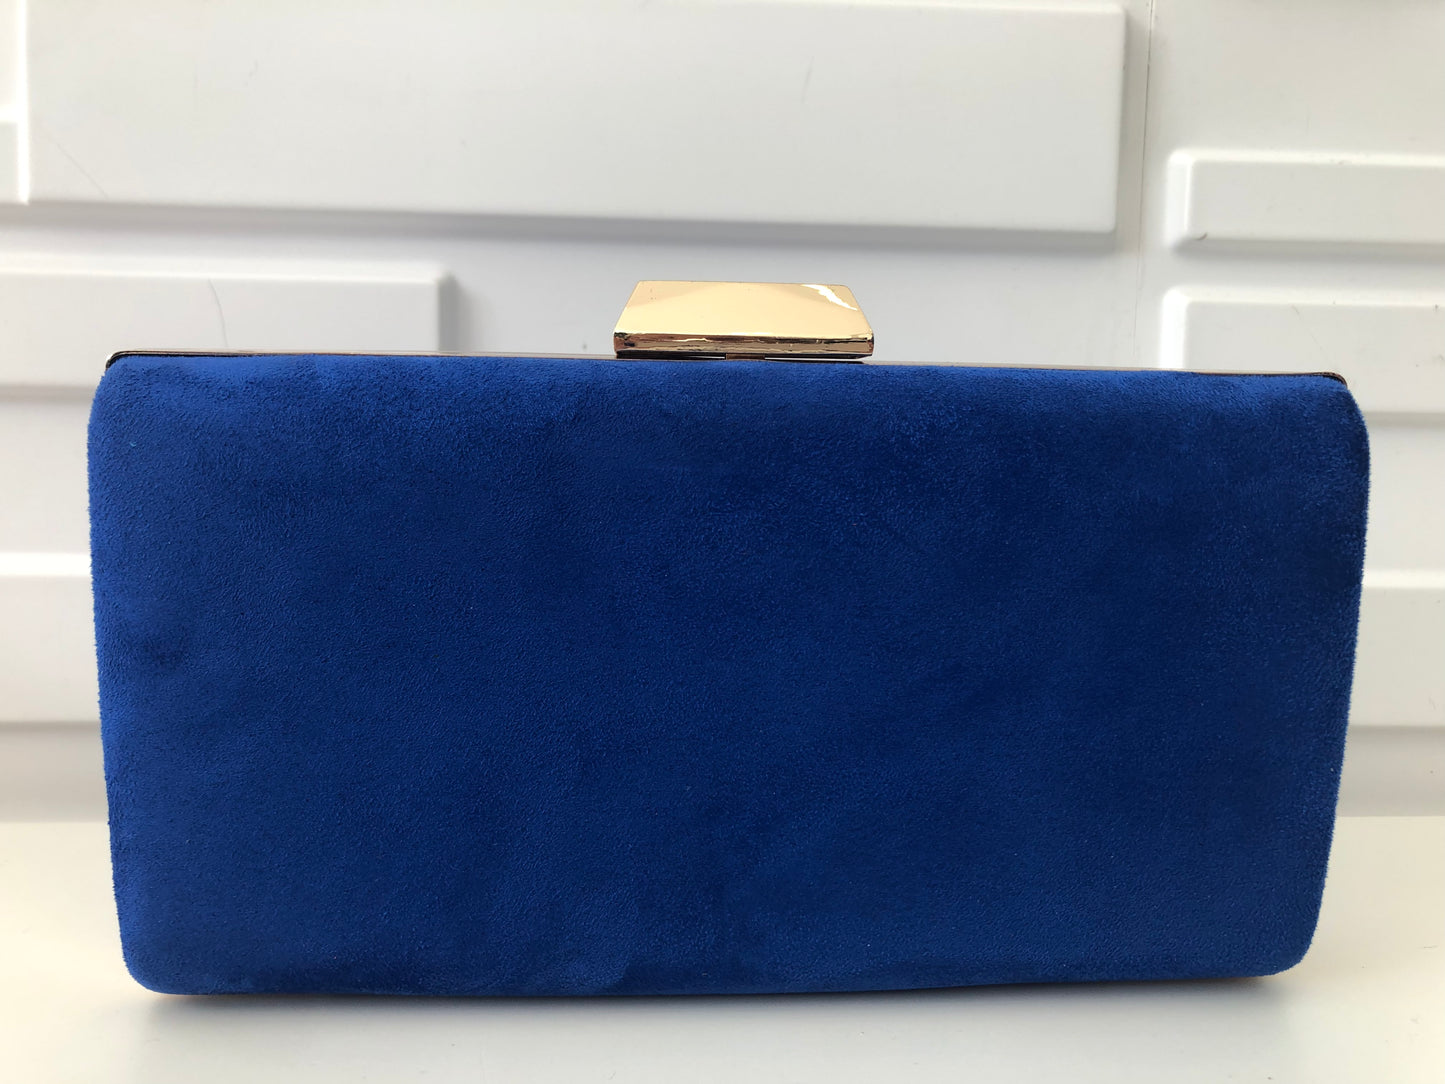 “Eve” Clutch Bag (Chain strap included)